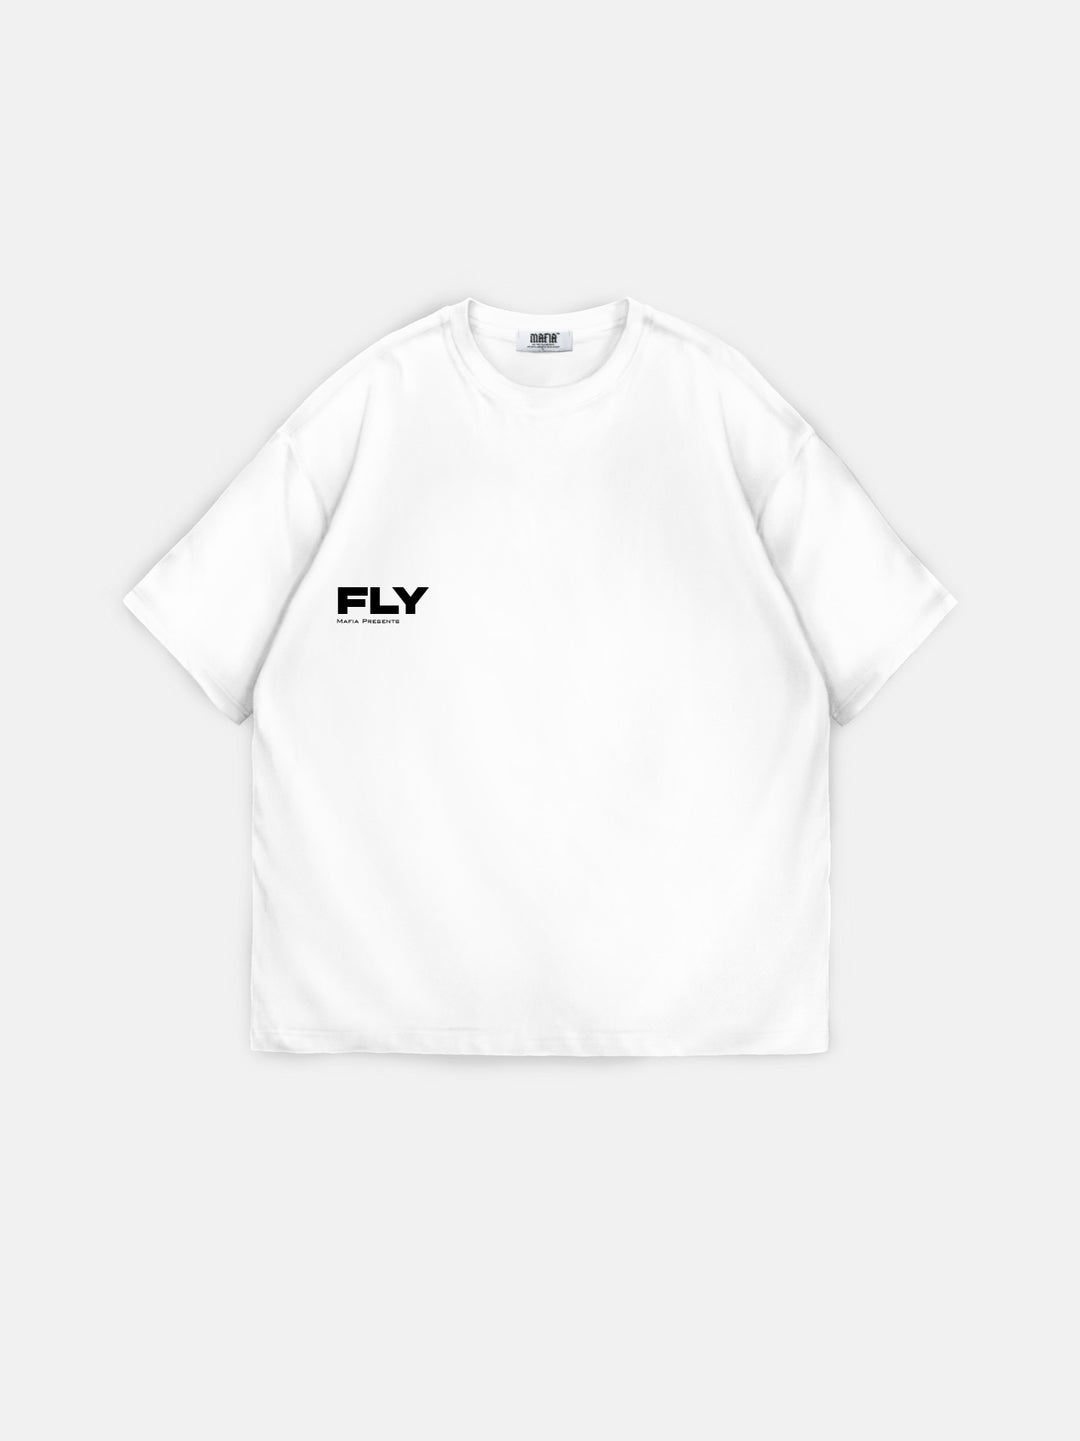 Oversize 'Fly' T-shirt - White and Blue